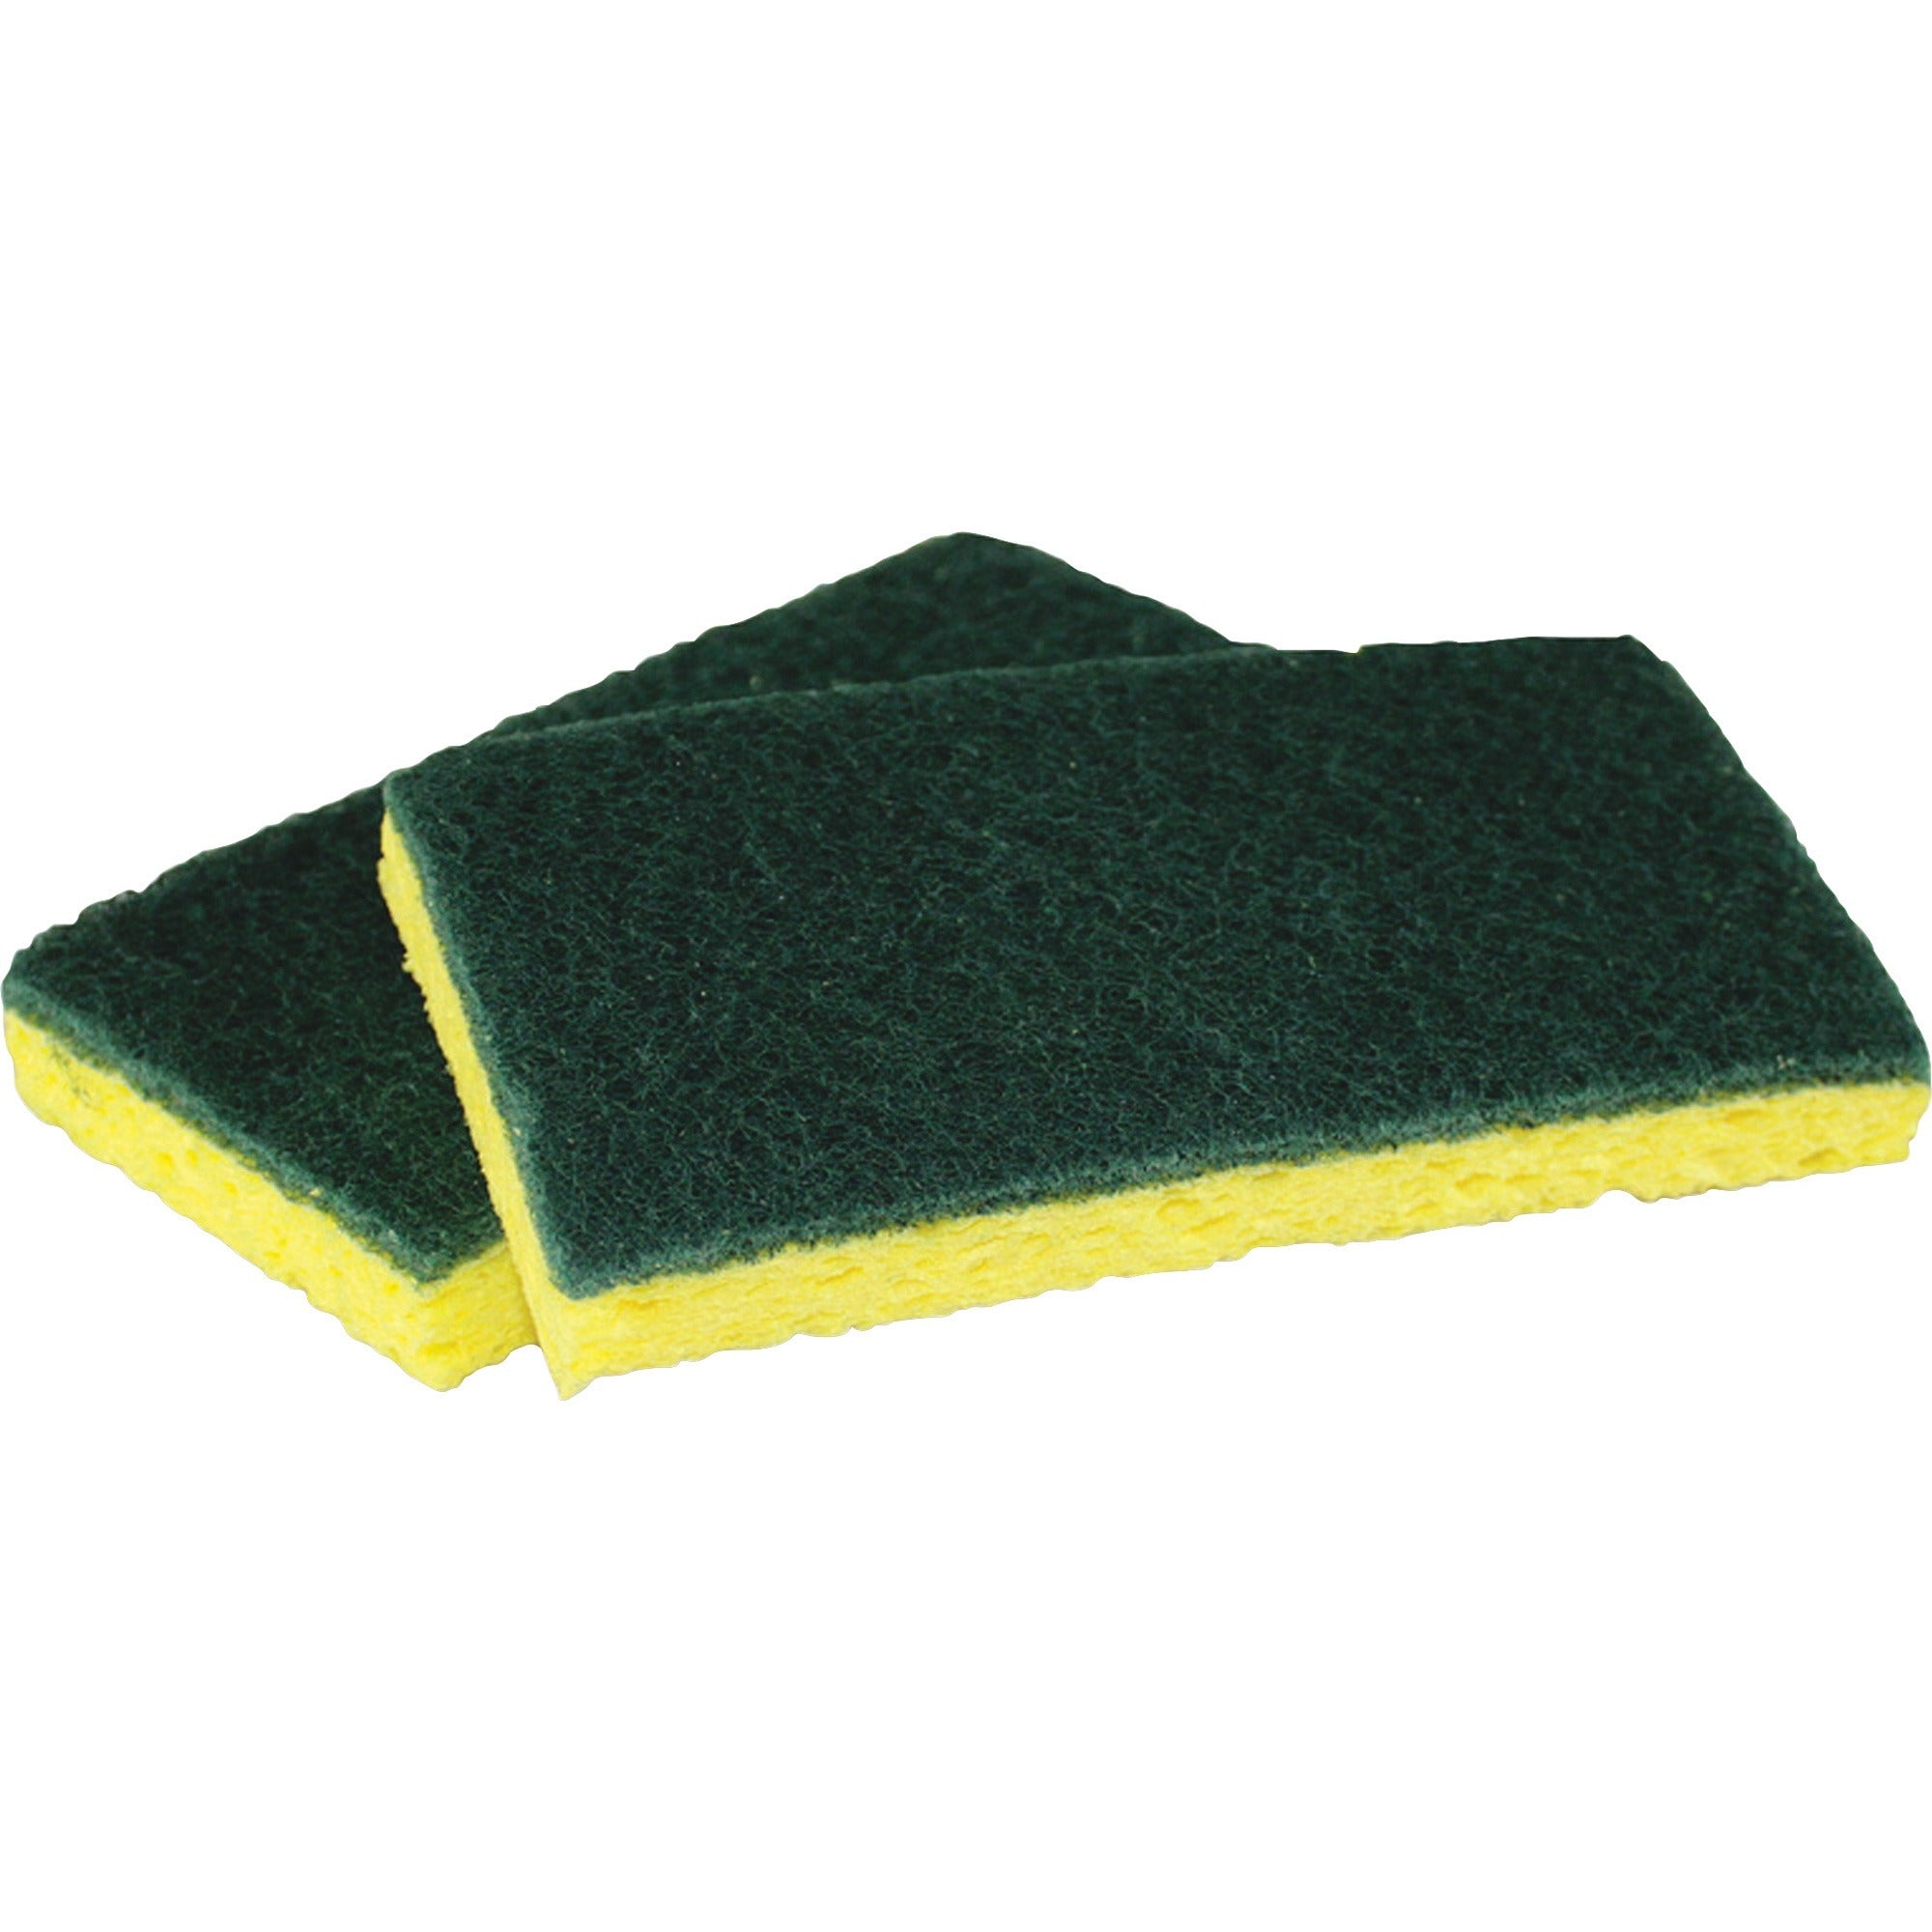 Impact Cellulose Scrubber Sponge - 0.9" Height x 3.2" Width x 6.3" Length - 40/Carton - Cellulose - Yellow, Green - 